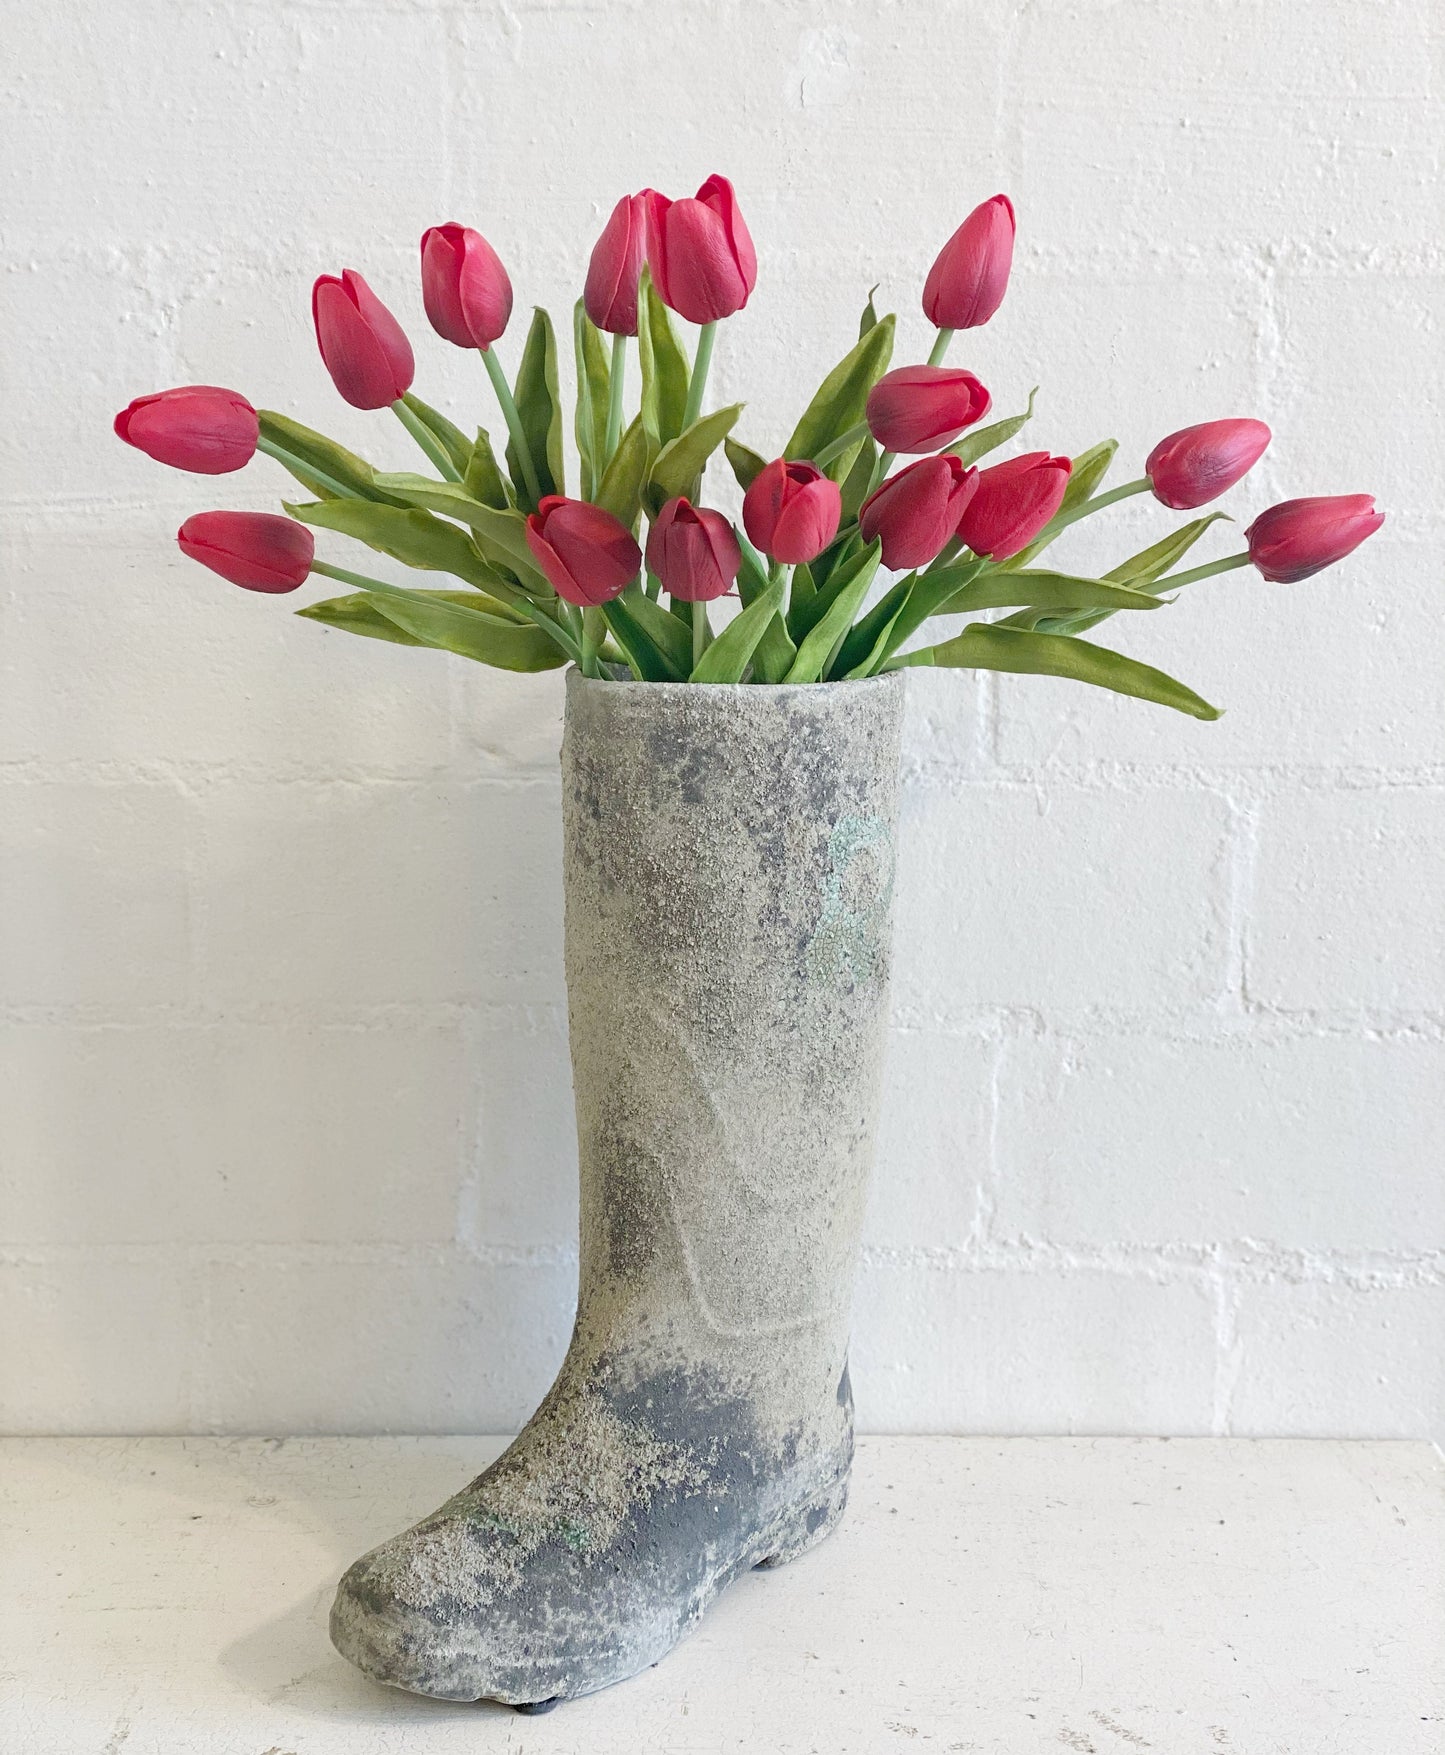 Clay Distressed Patina Garden Boot